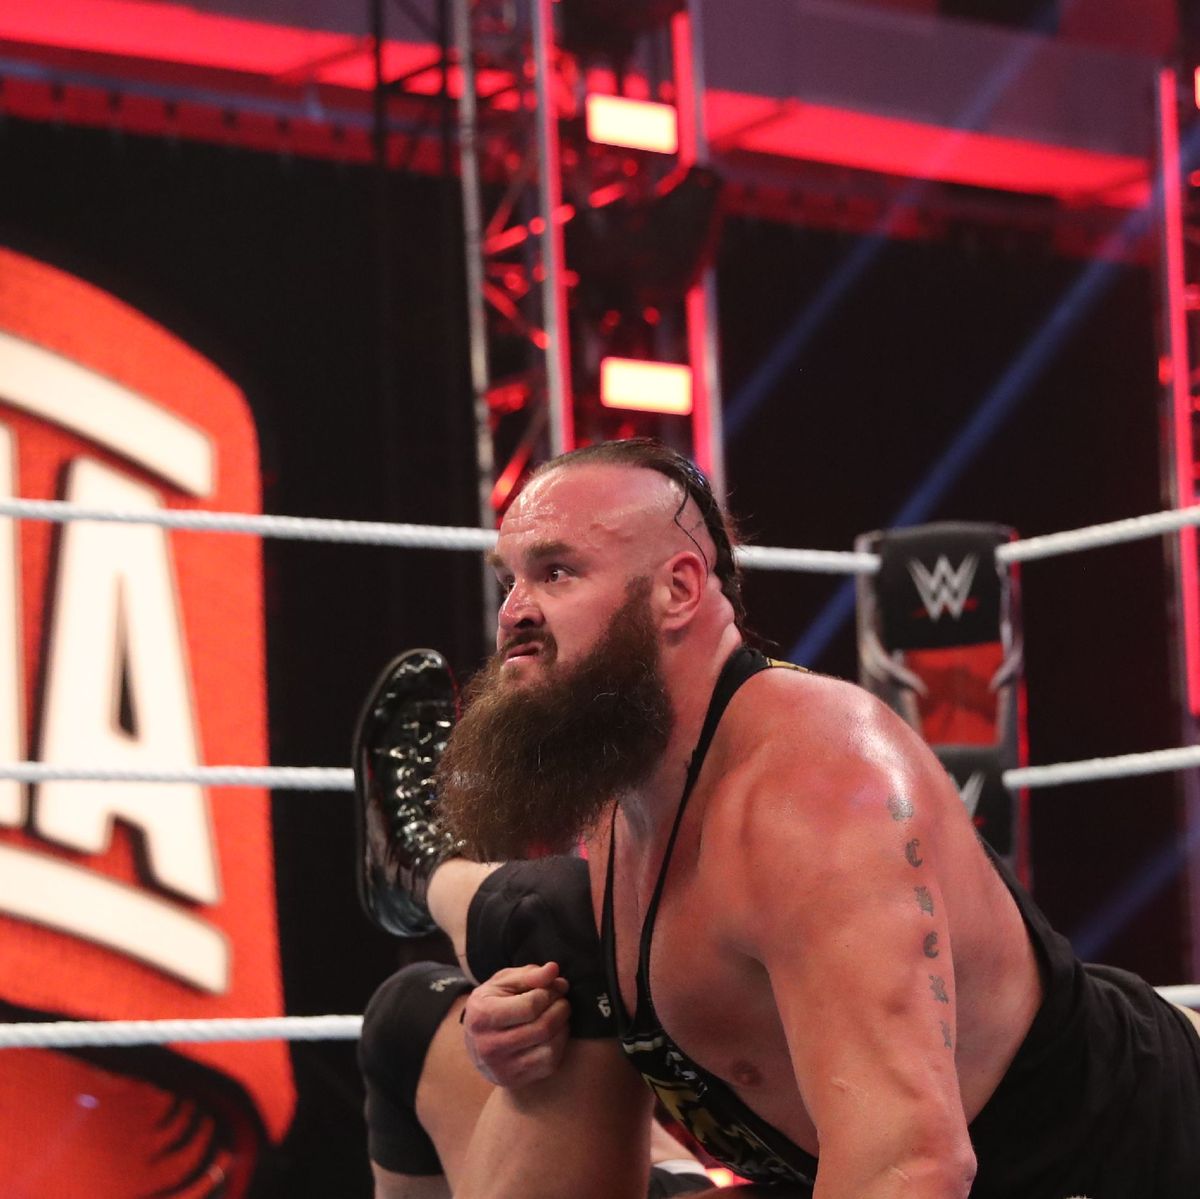 WWE releases Superstars including Lana and Braun Strowman